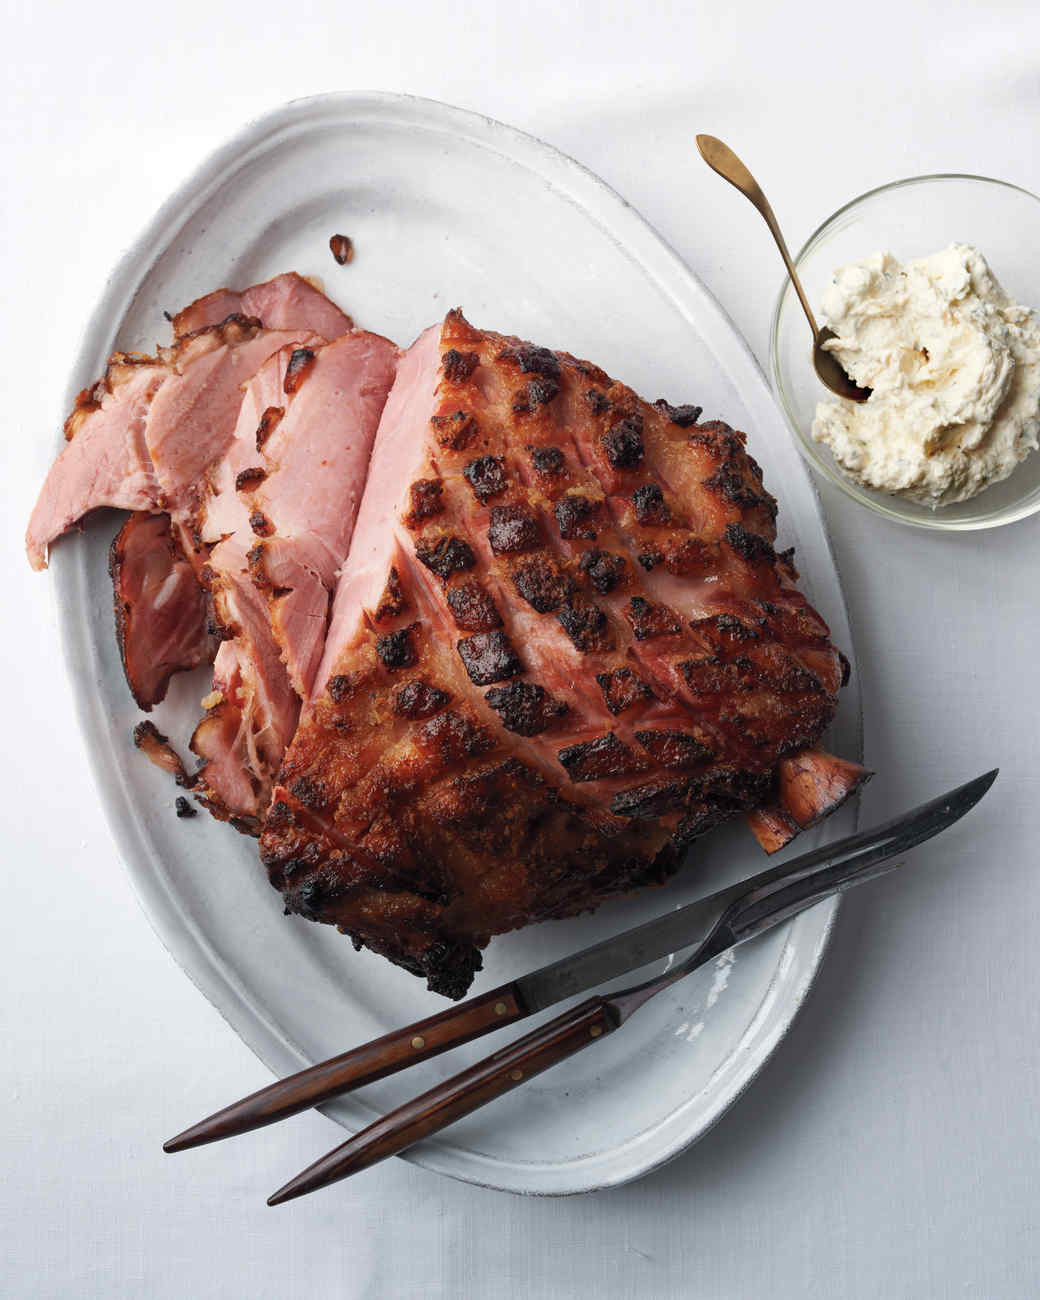 Recipes For Easter Ham
 Easter Ham Recipes To Glaze or Not to Glaze That Is the